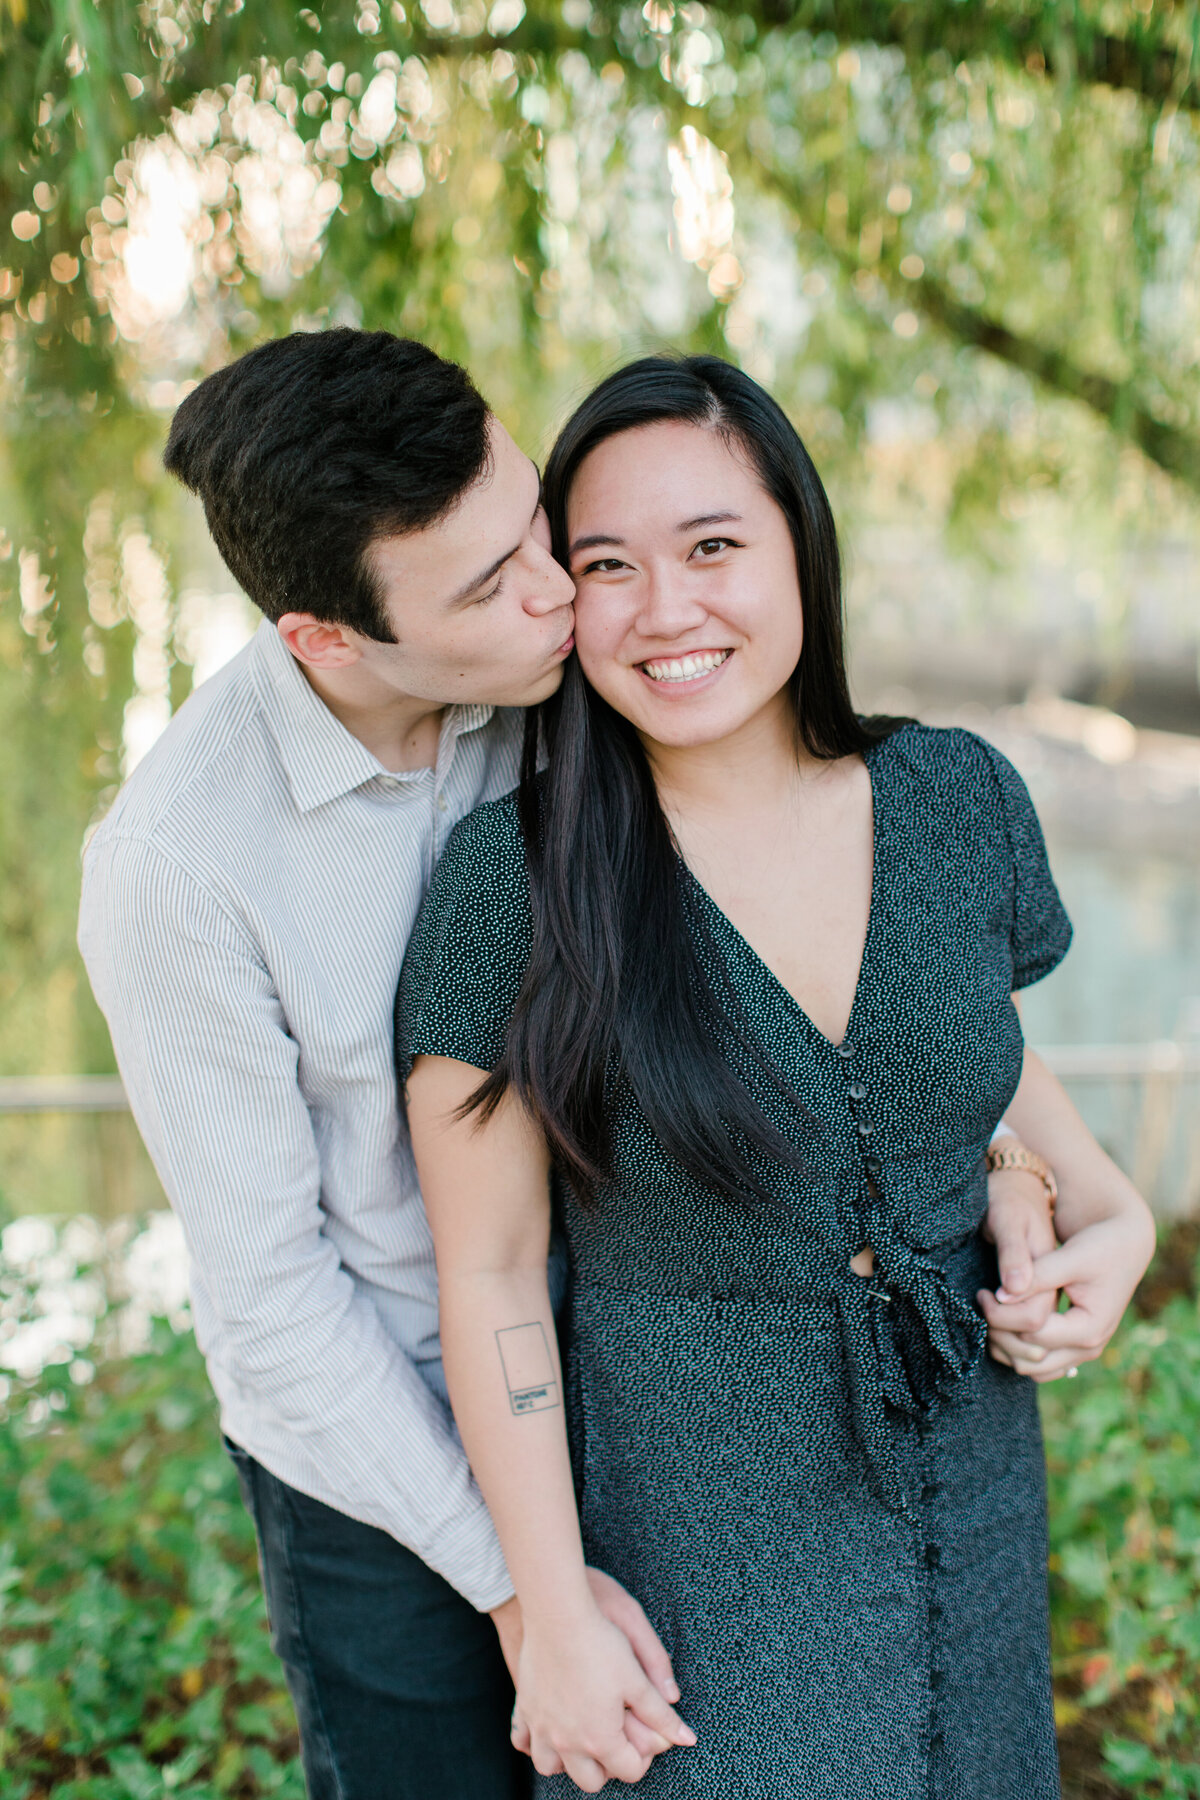 Becky_Collin_Navy_Yards_Park_The_Wharf_Washington_DC_Fall_Engagement_Session_AngelikaJohnsPhotography-7807